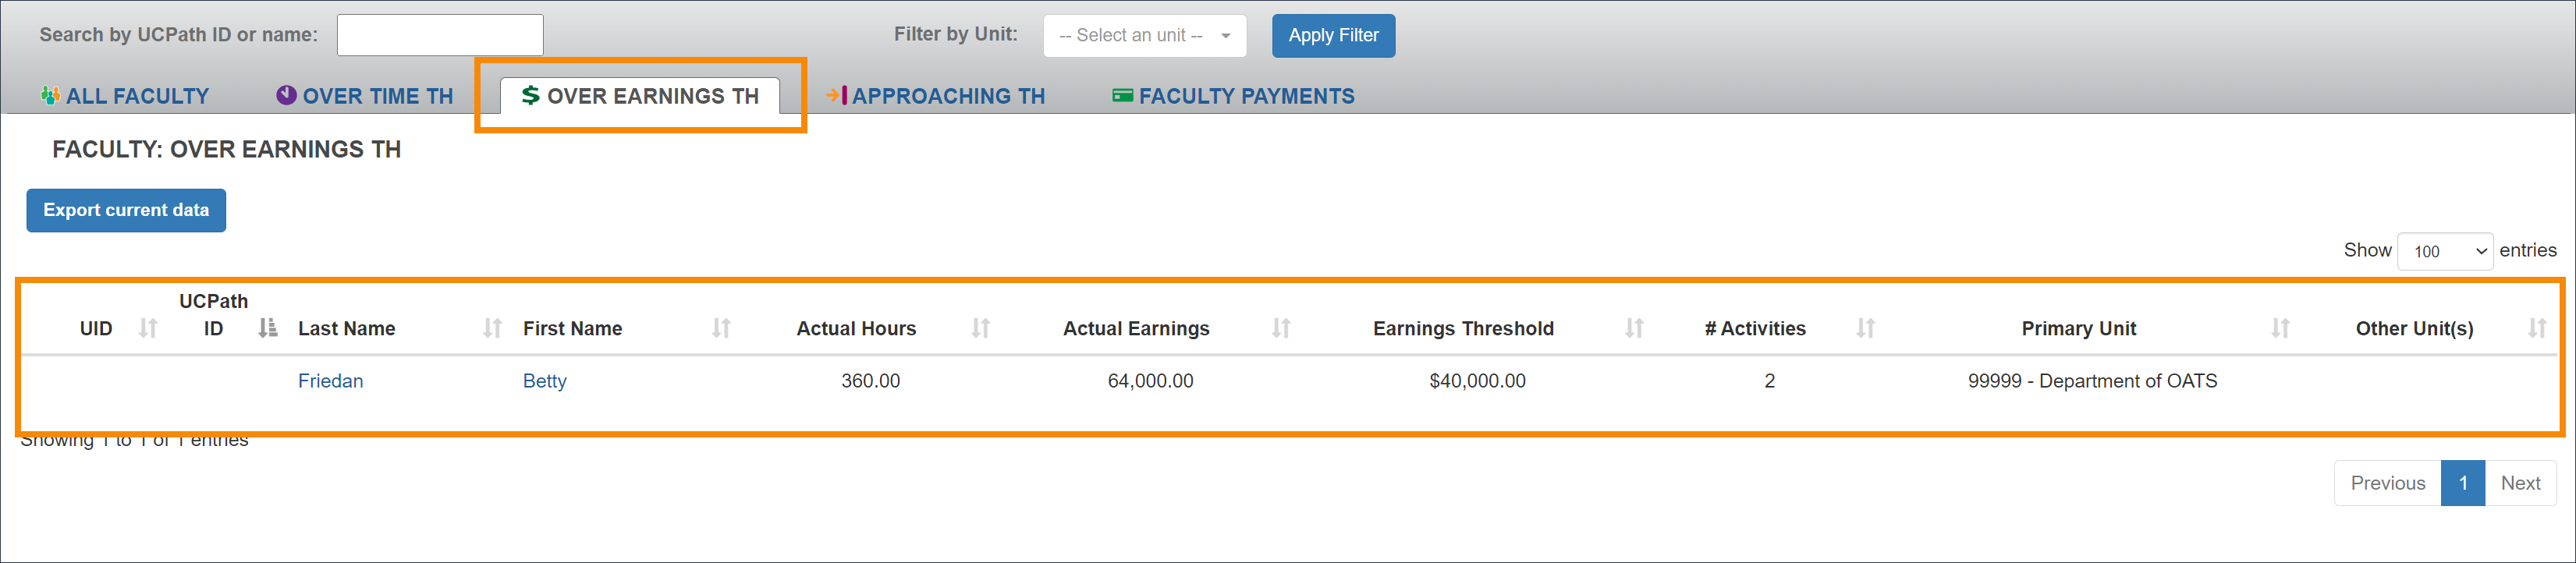 Over Earnings Threshold tab that lists faculty members that exceed their earnings threshold